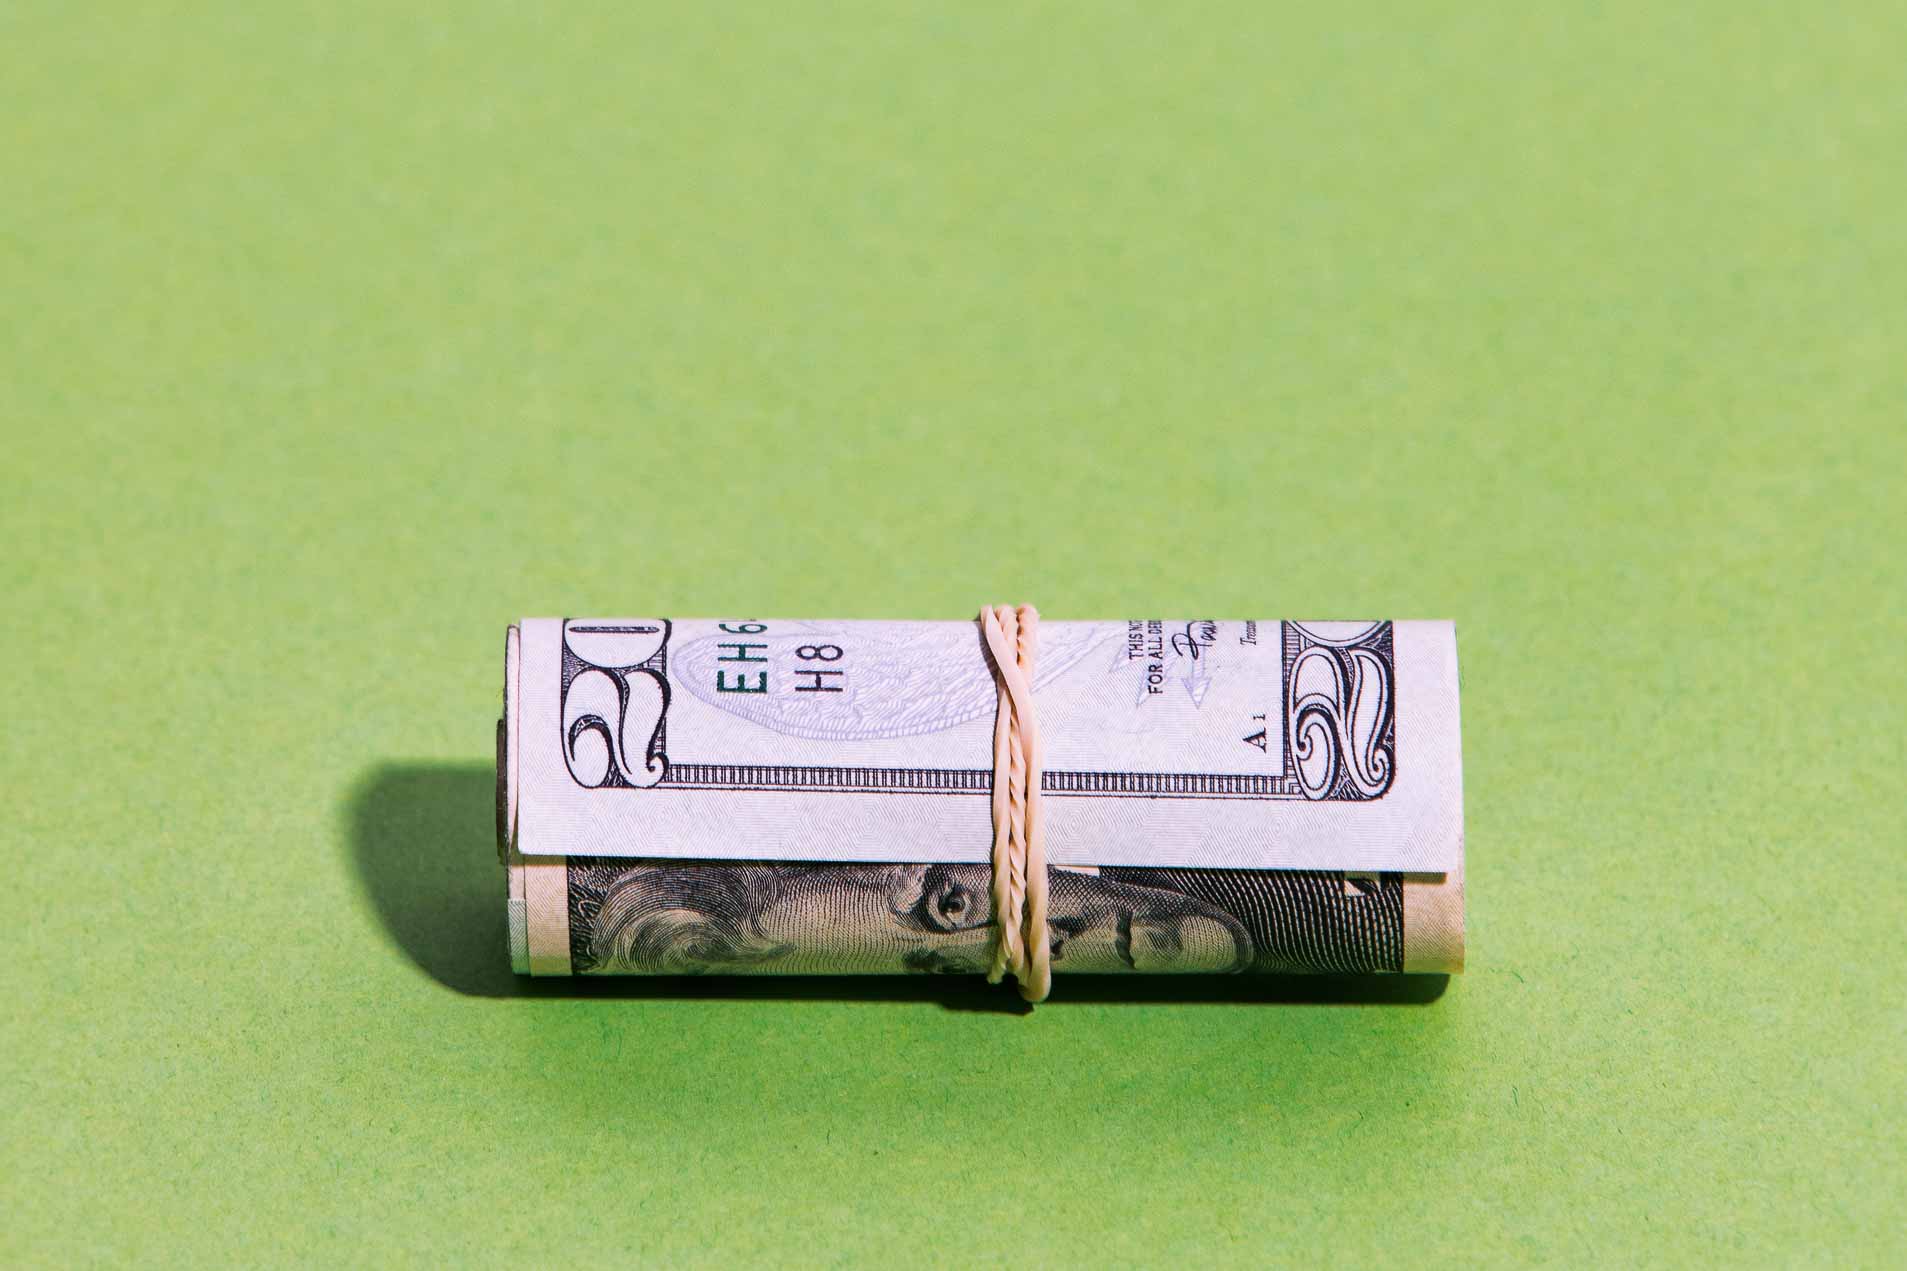 Images of money on a uniform green background.